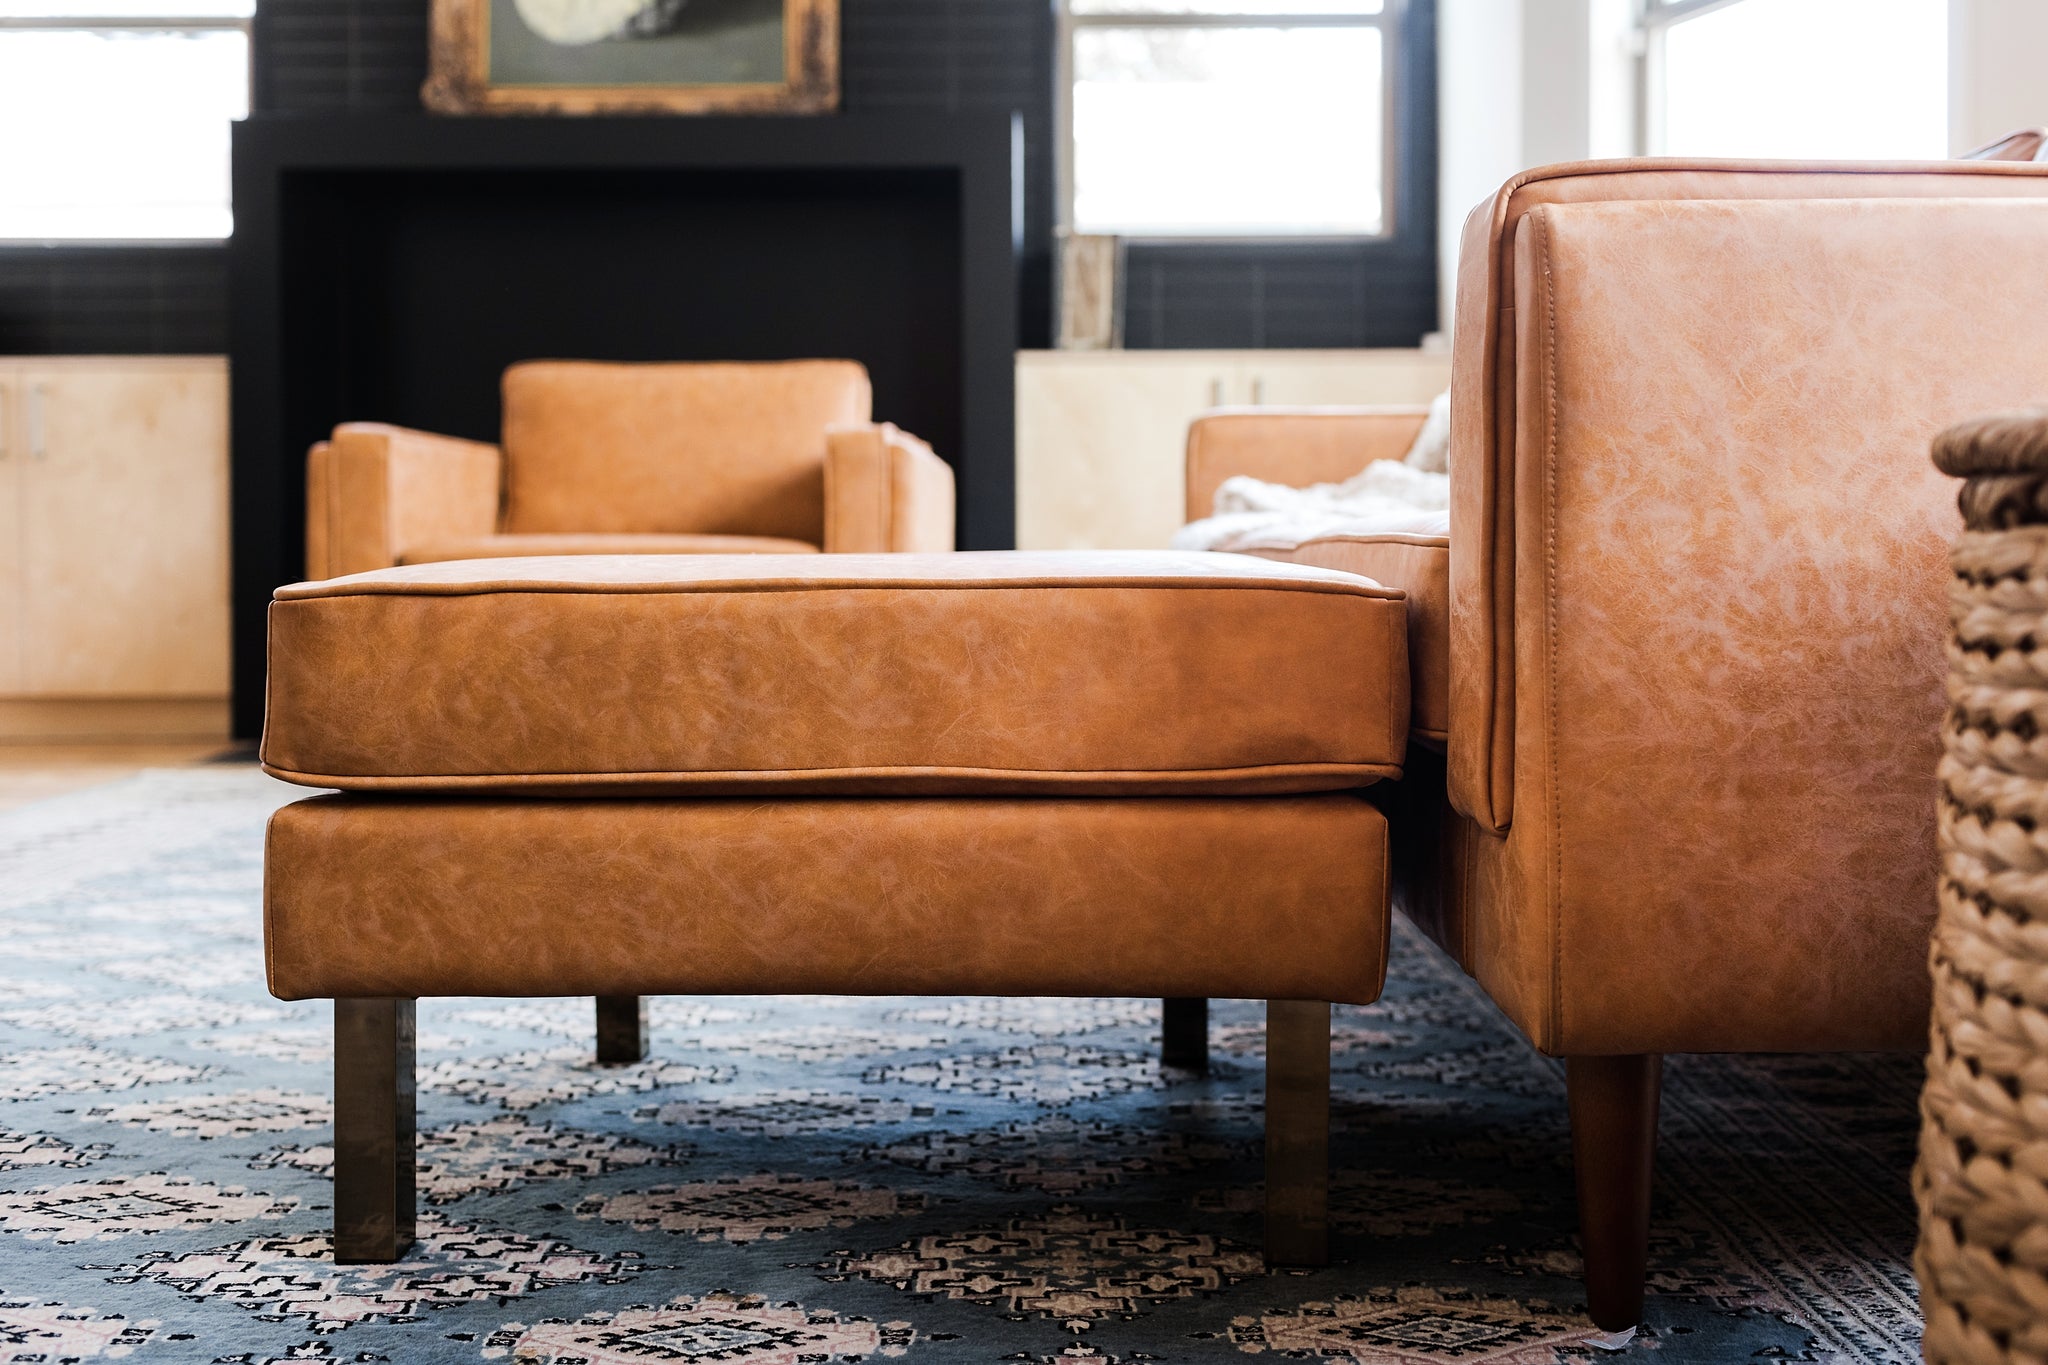 albany ottoman shown in distressed vegan leather with gold legs